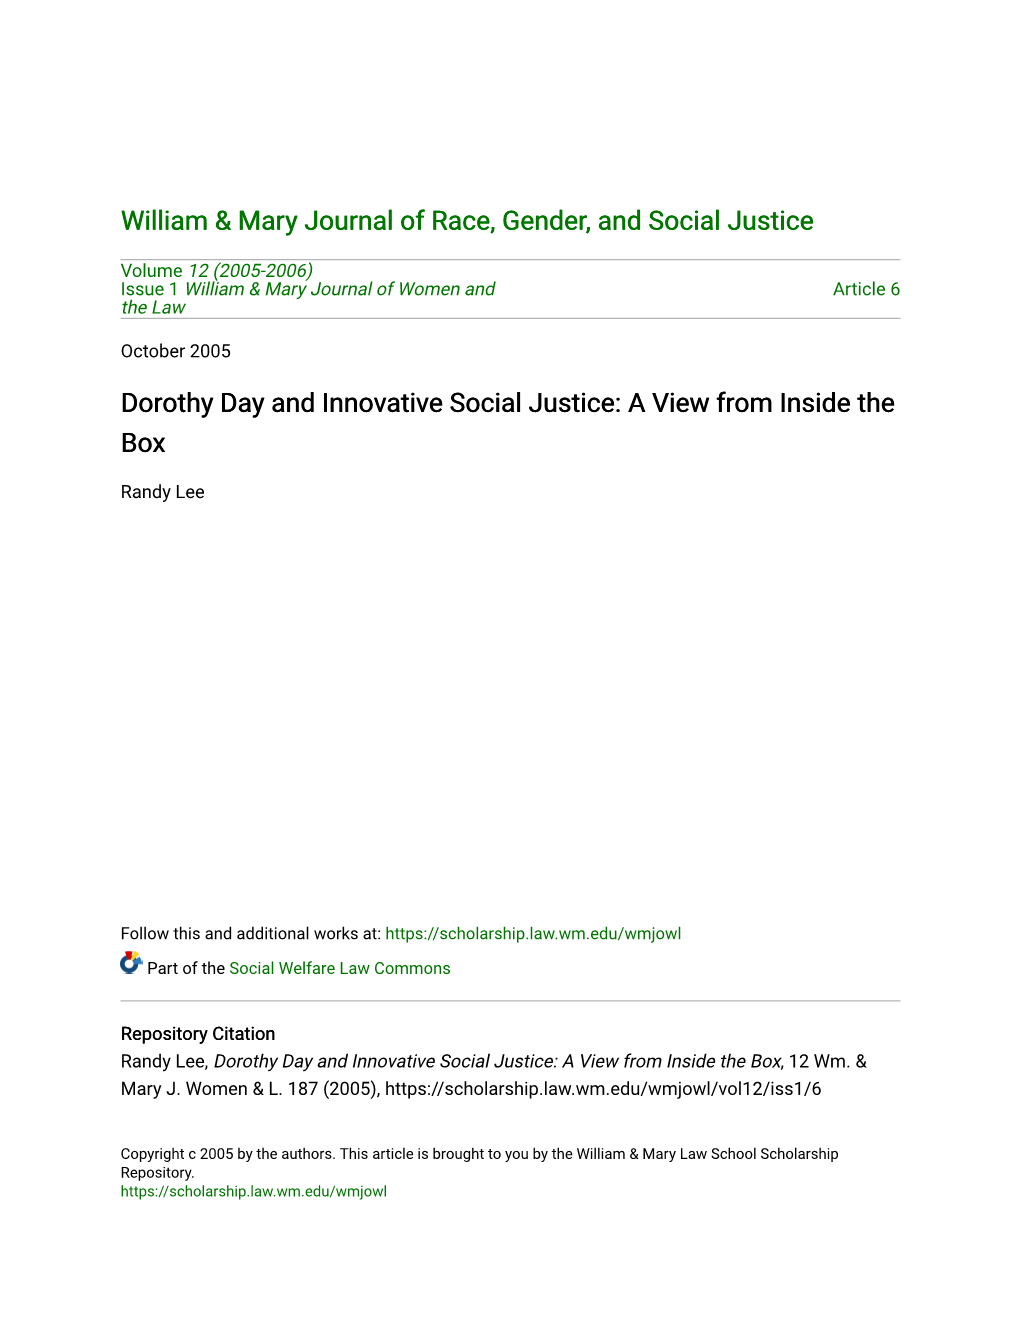 Dorothy Day and Innovative Social Justice: a View from Inside the Box